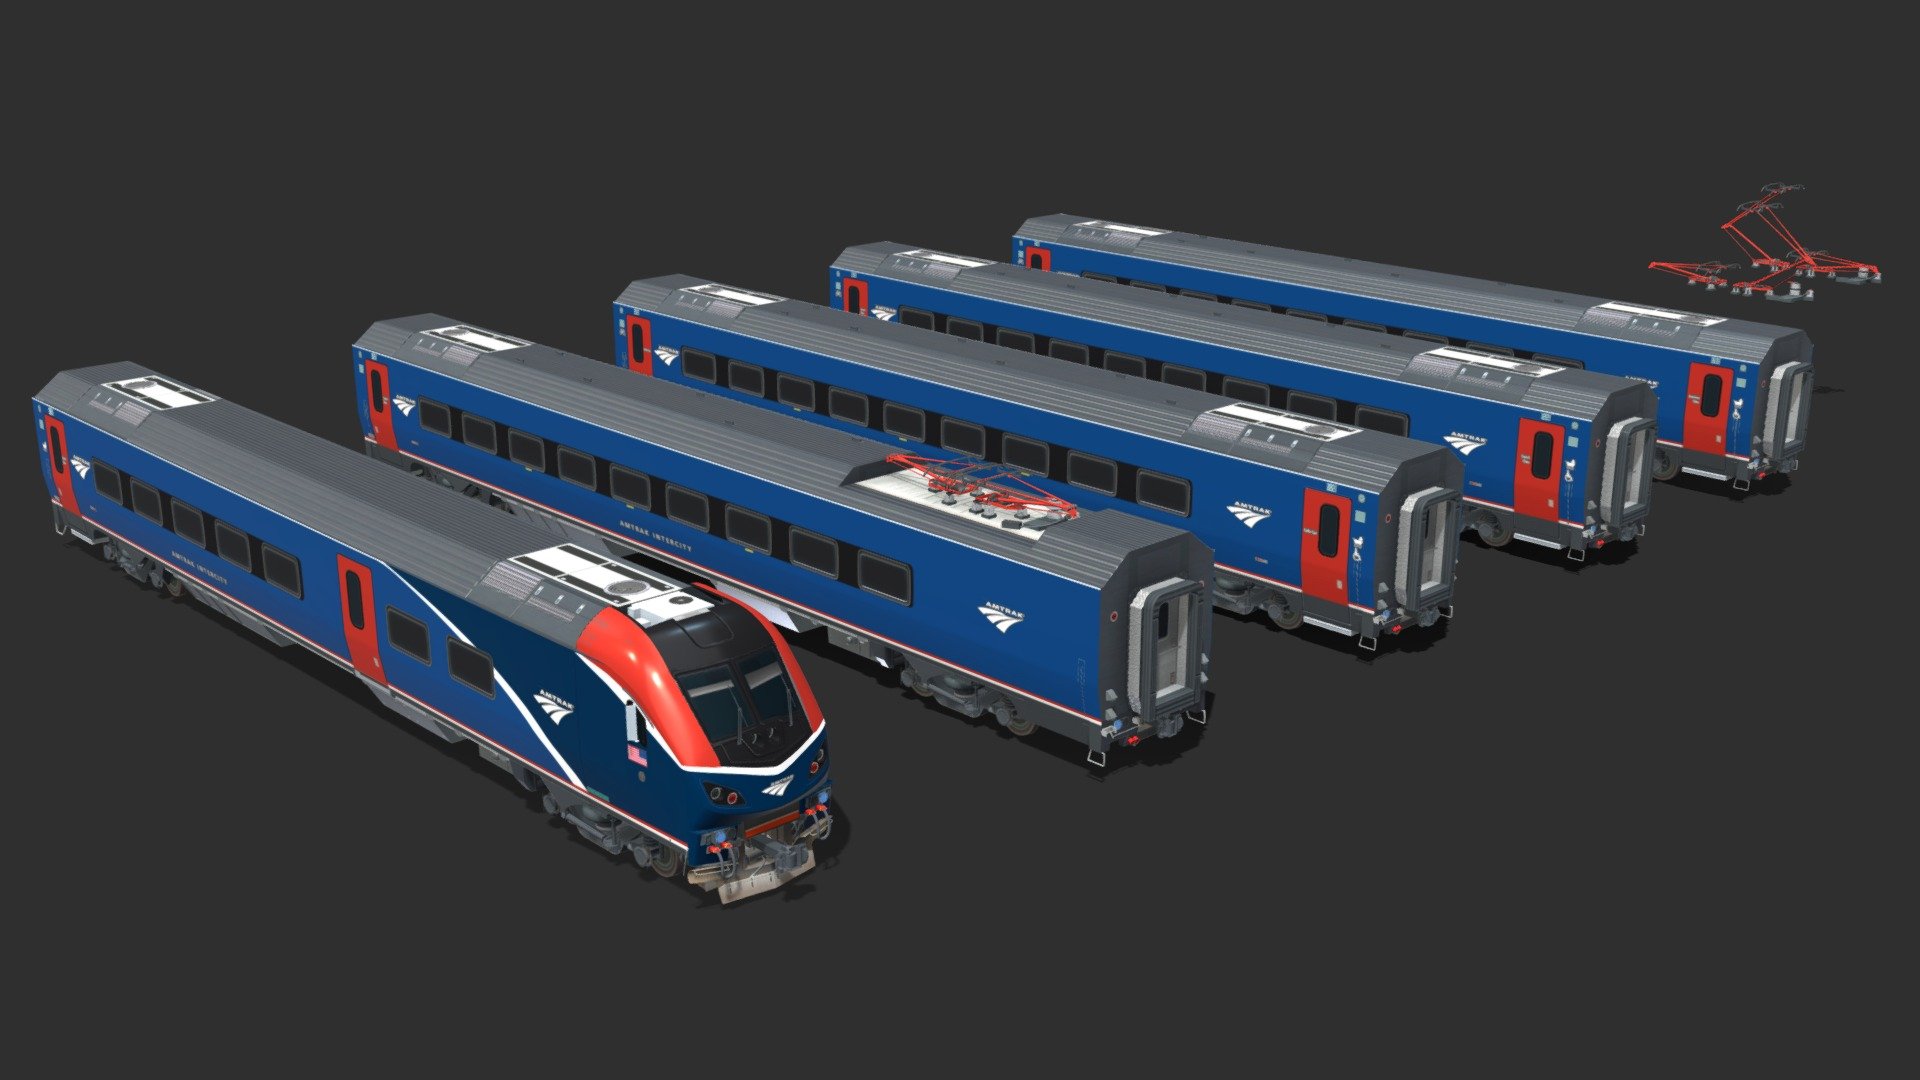 Amtrak Intercity variant of Siemens Venture coaches, based on the Fleet Acquisition documents provided by Amtrak. Amtrak Intercity is a replacement fleet of aging Amfleet II and other various assets used on Northeast Corridor. It aims to standardize the fleet operated on the busiest passenger rail route of United States with a singular and yet versatile fleet of Venture coaches and Charger engines. Intercity fleet will include driving trailers in order to remove engine switching, coach and business classes, as well as power/battery car. Battery car will feature a pantograph to power the consist on Northeast Corridor (NEC), whereas outside the NEC, Charger engine will operate with its diesel engine. 

Venture Intercity, as well as Charger pack are made for the video game Cities: Skylines. It contains coaches, texture set, modular pantographs in 3 position. Pantograph height is standard NEC overhead height. 

Charger set can be purchased here: https://skfb.ly/oyNZs - Siemens Venture - Amtrak Intercity - Buy Royalty Free 3D model by REV0 (@R3V0_76) 3d model